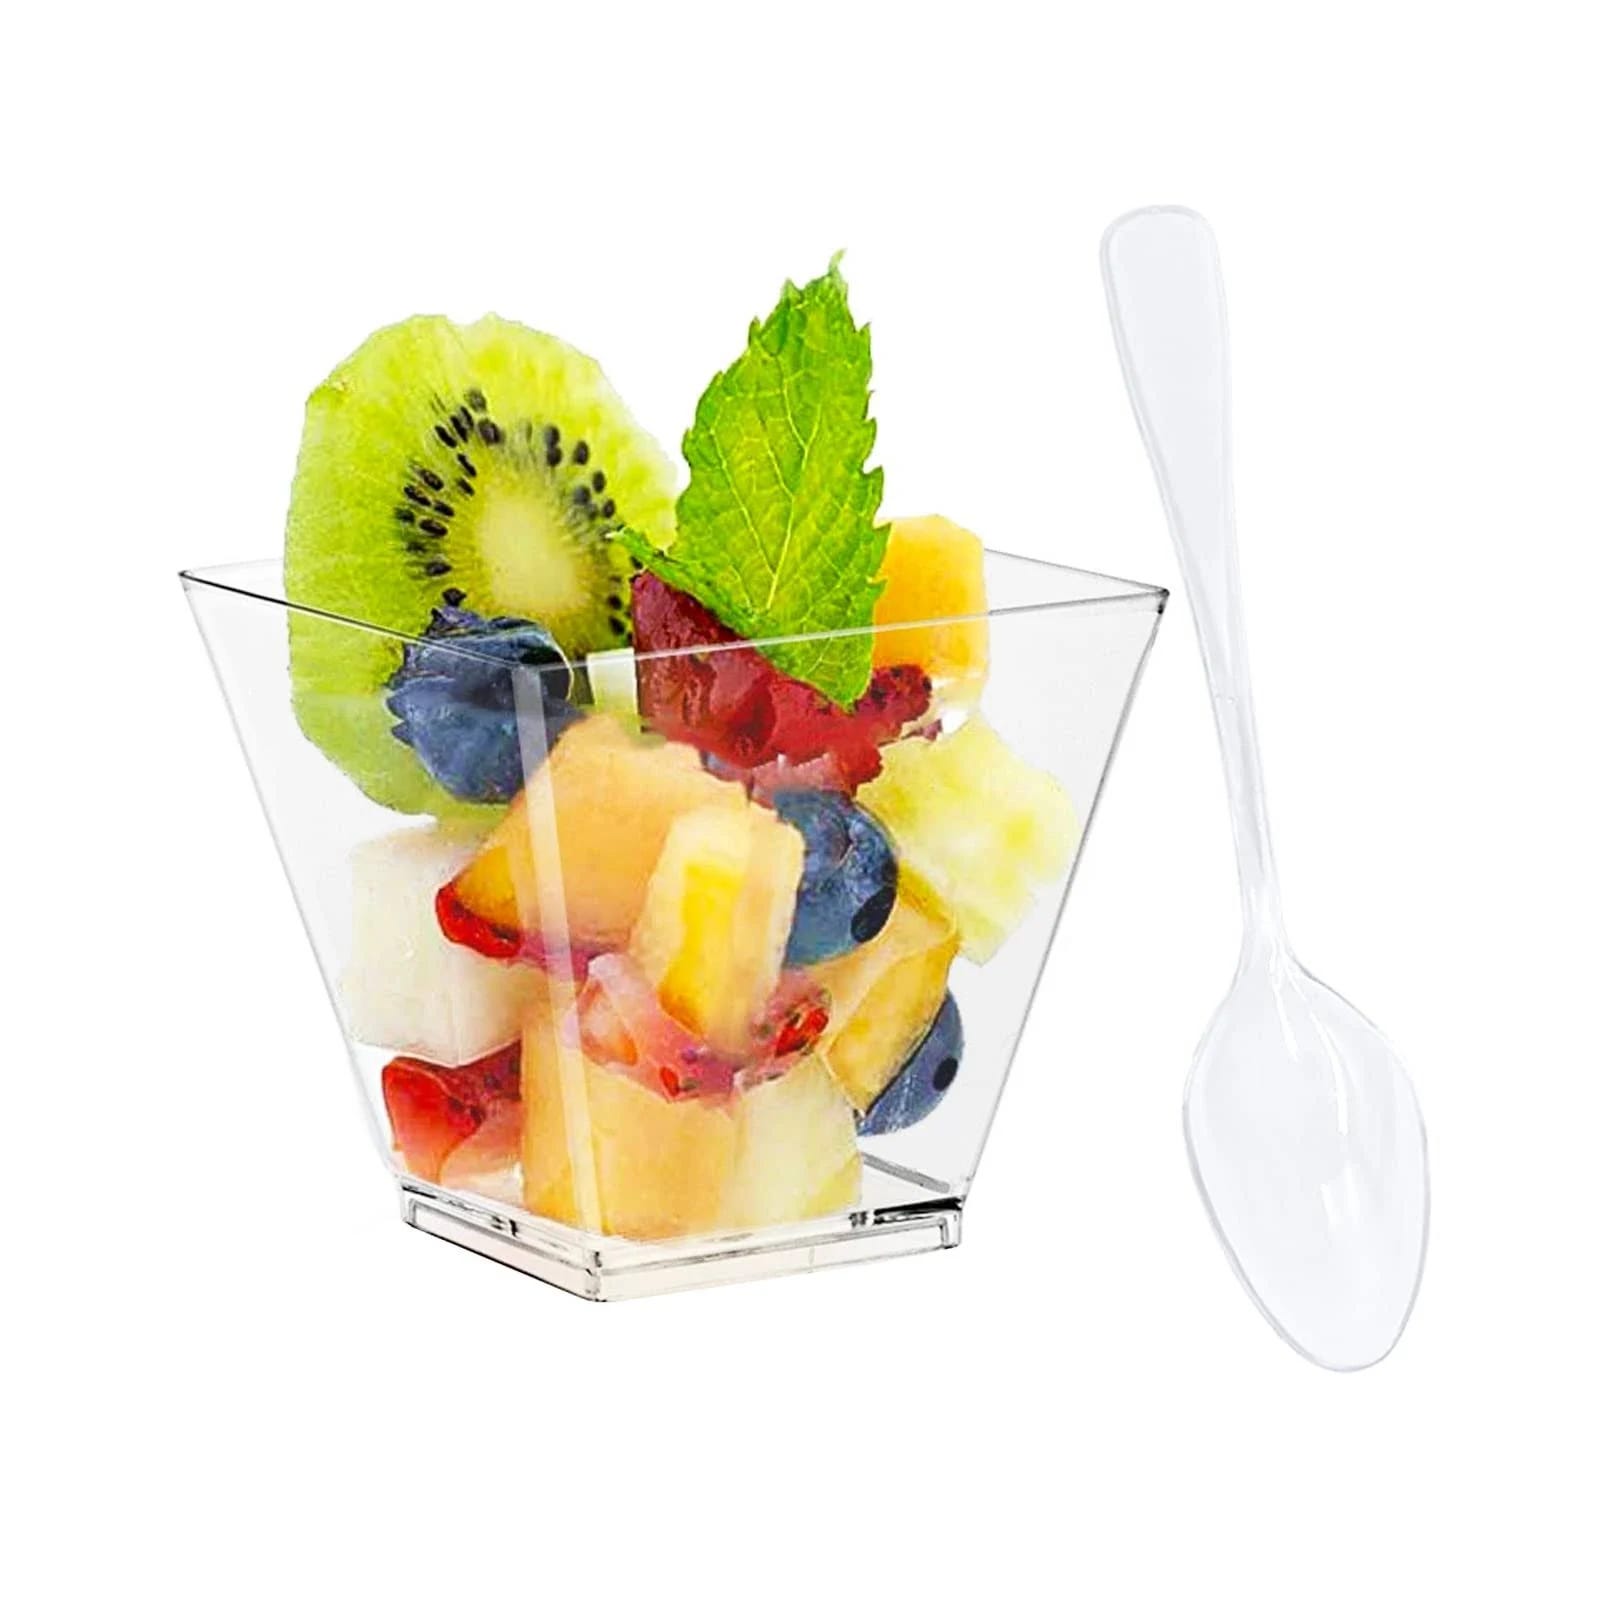 100 Piece Clear Square Plastic Dessert Cups with Spoons | Image